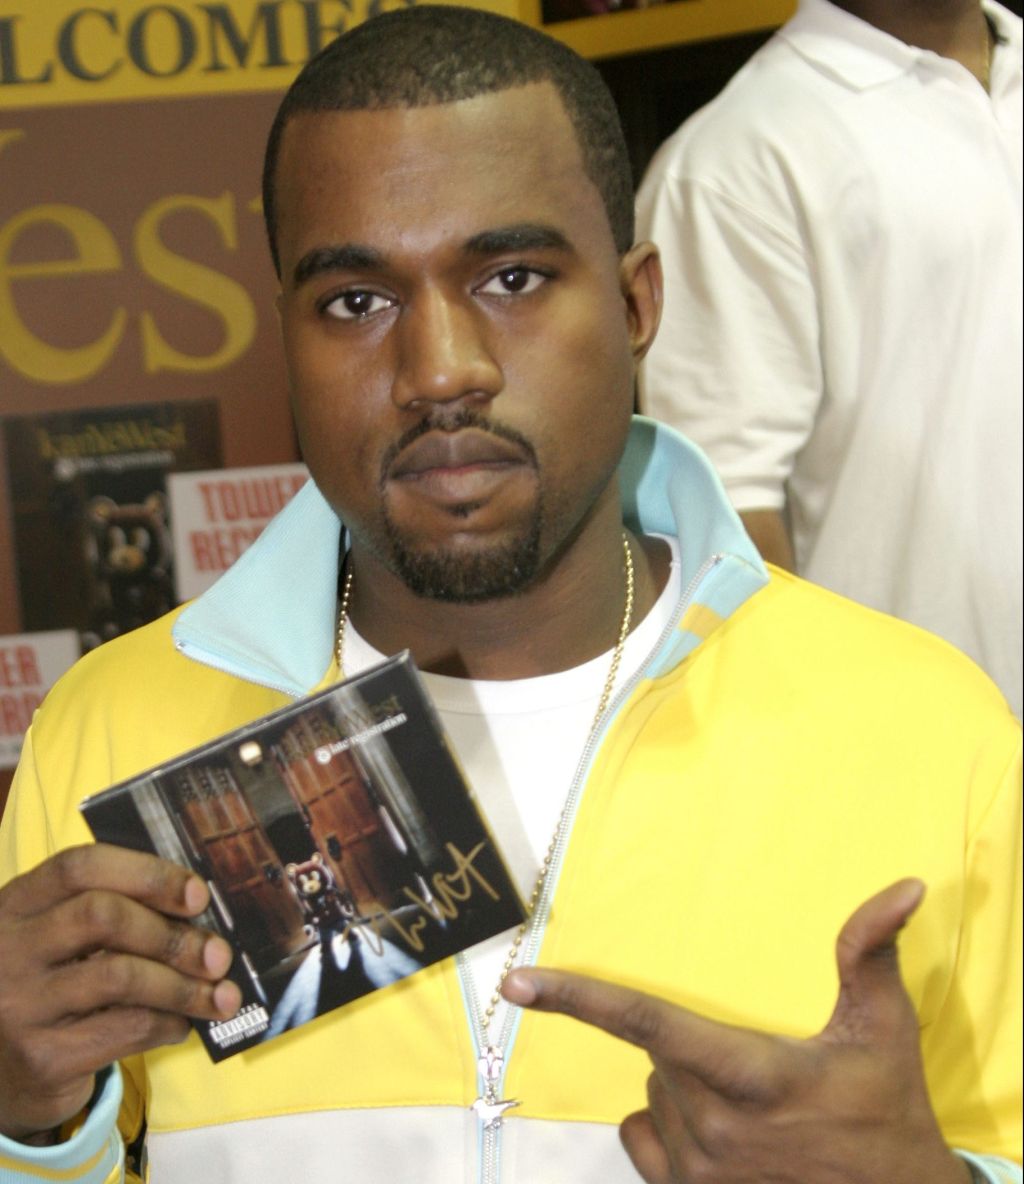 Kanye West Signs His Album Late Registration at Tower Records in New York City - August 30, 2005